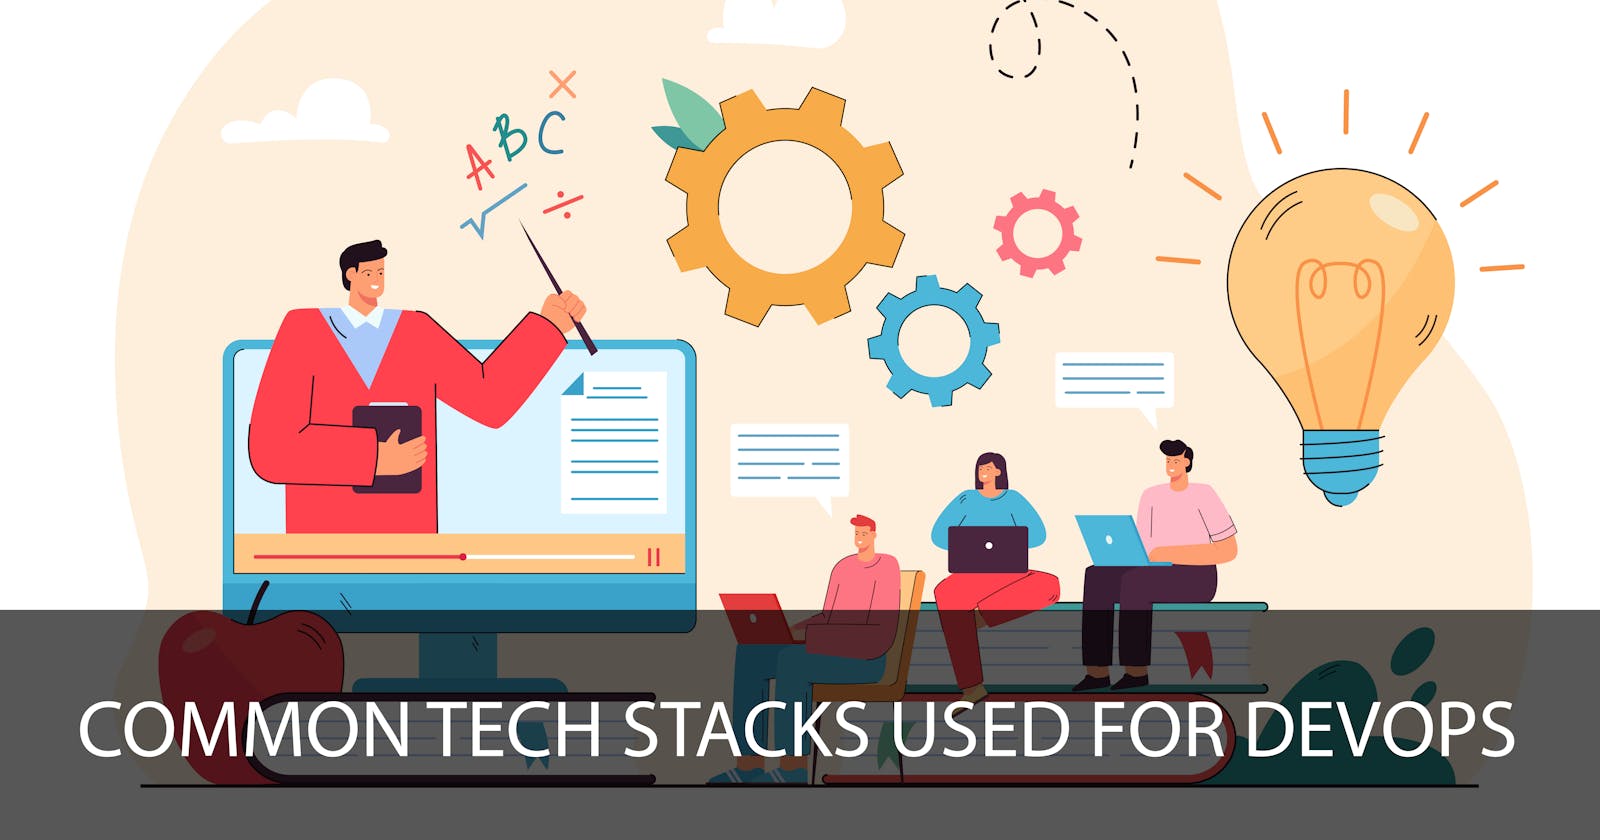 What are the most common Devops tech stacks used in startups?